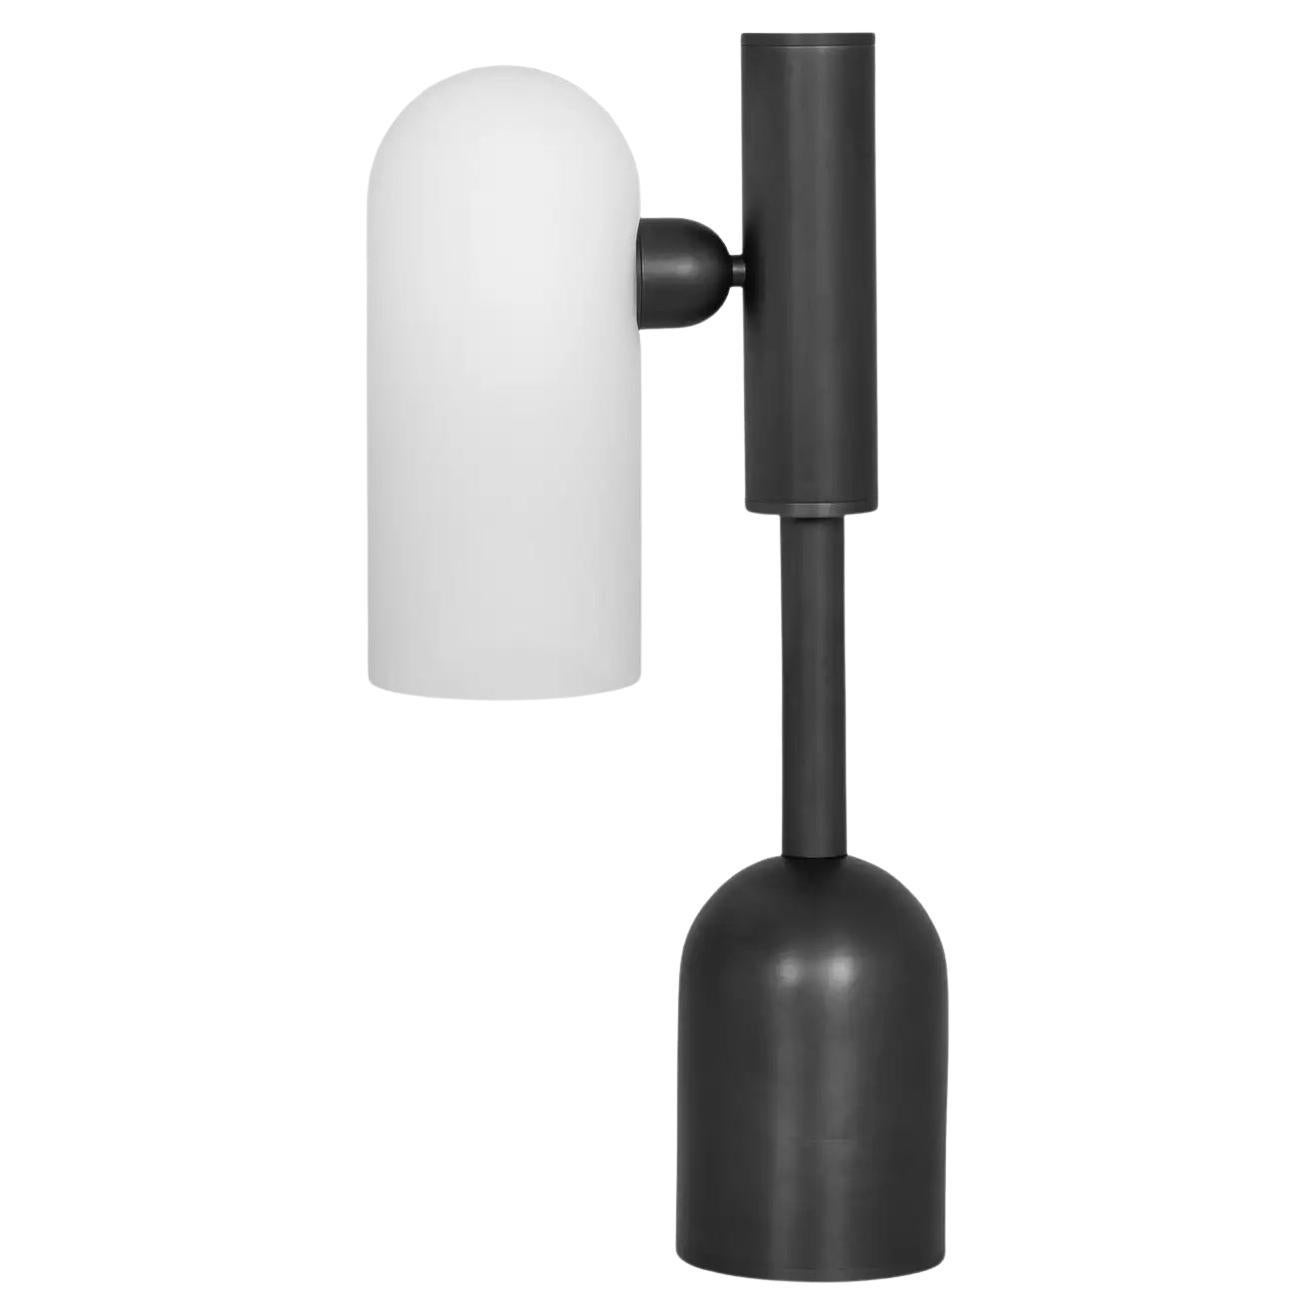 Odyssey 1 Black Table Lamp by Schwung For Sale